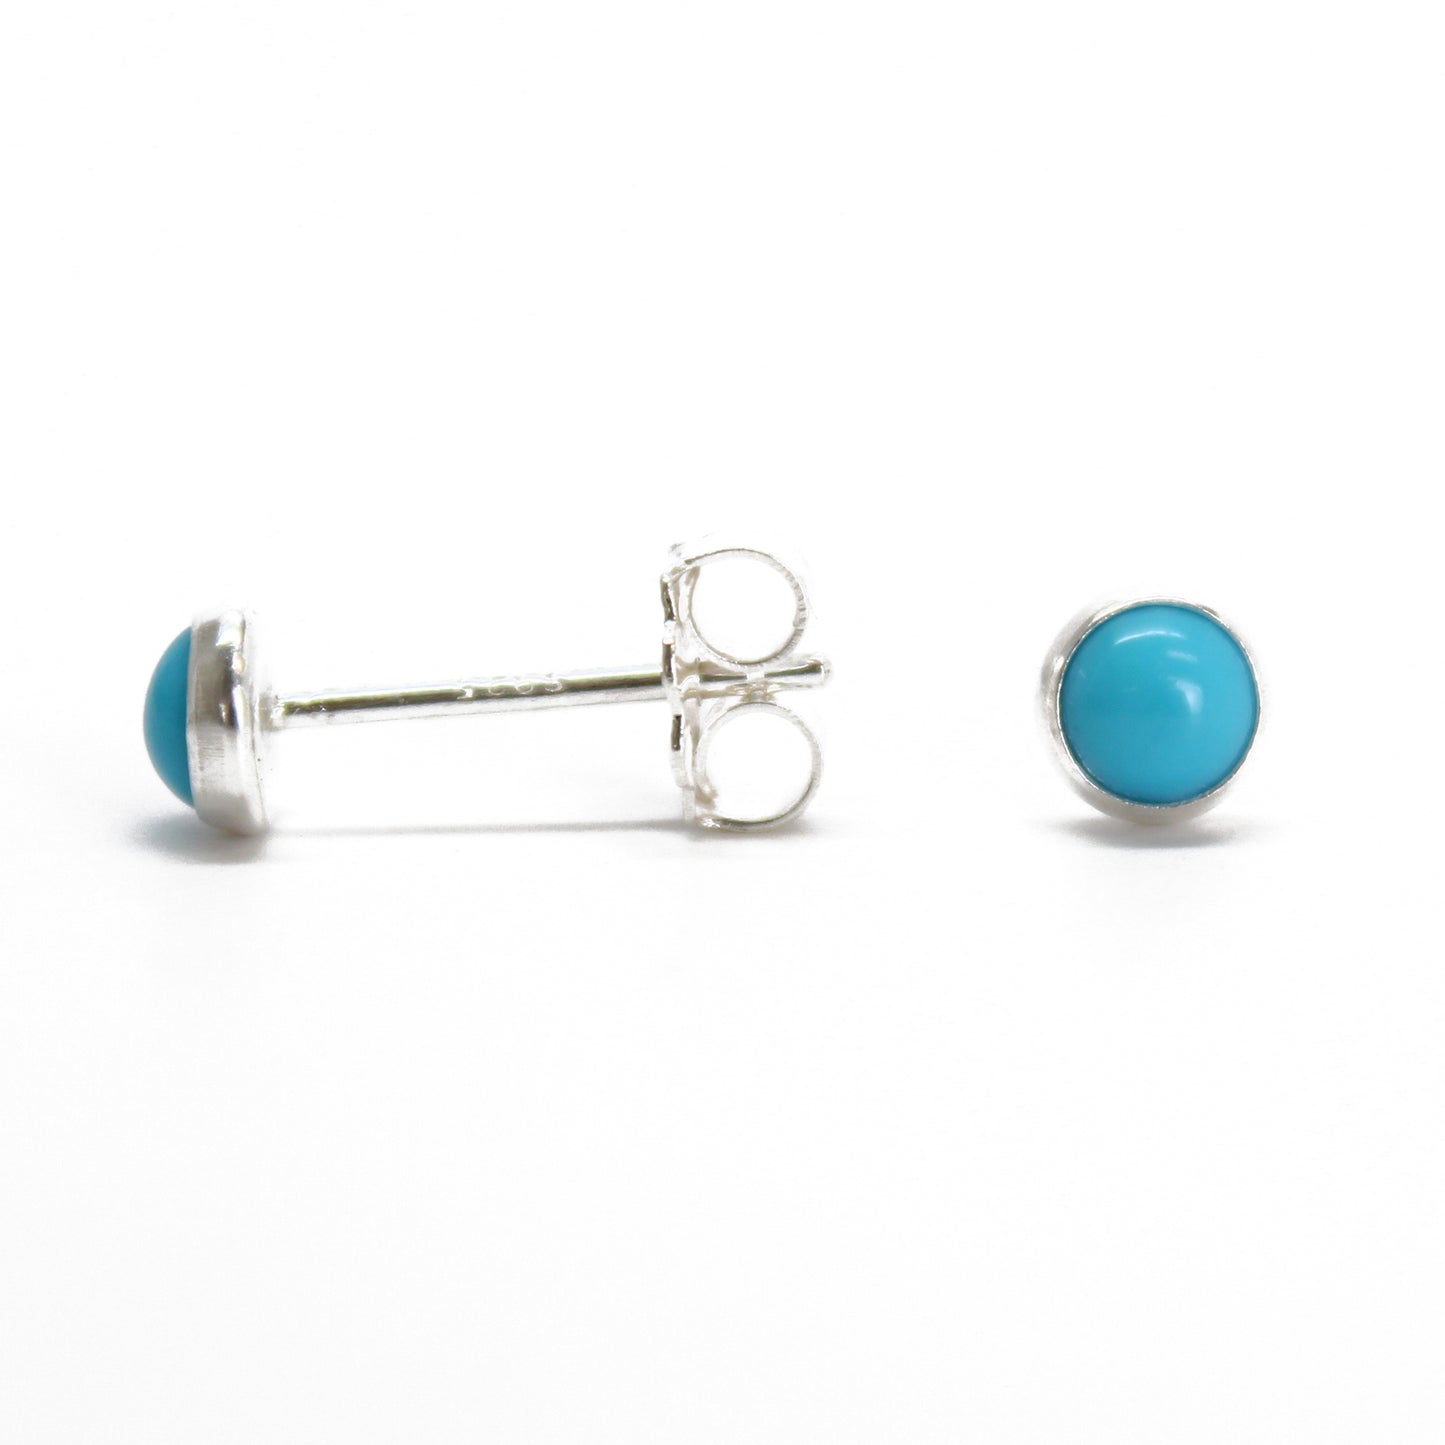 Pearl and Turquoise Studs Earrings ER 162B